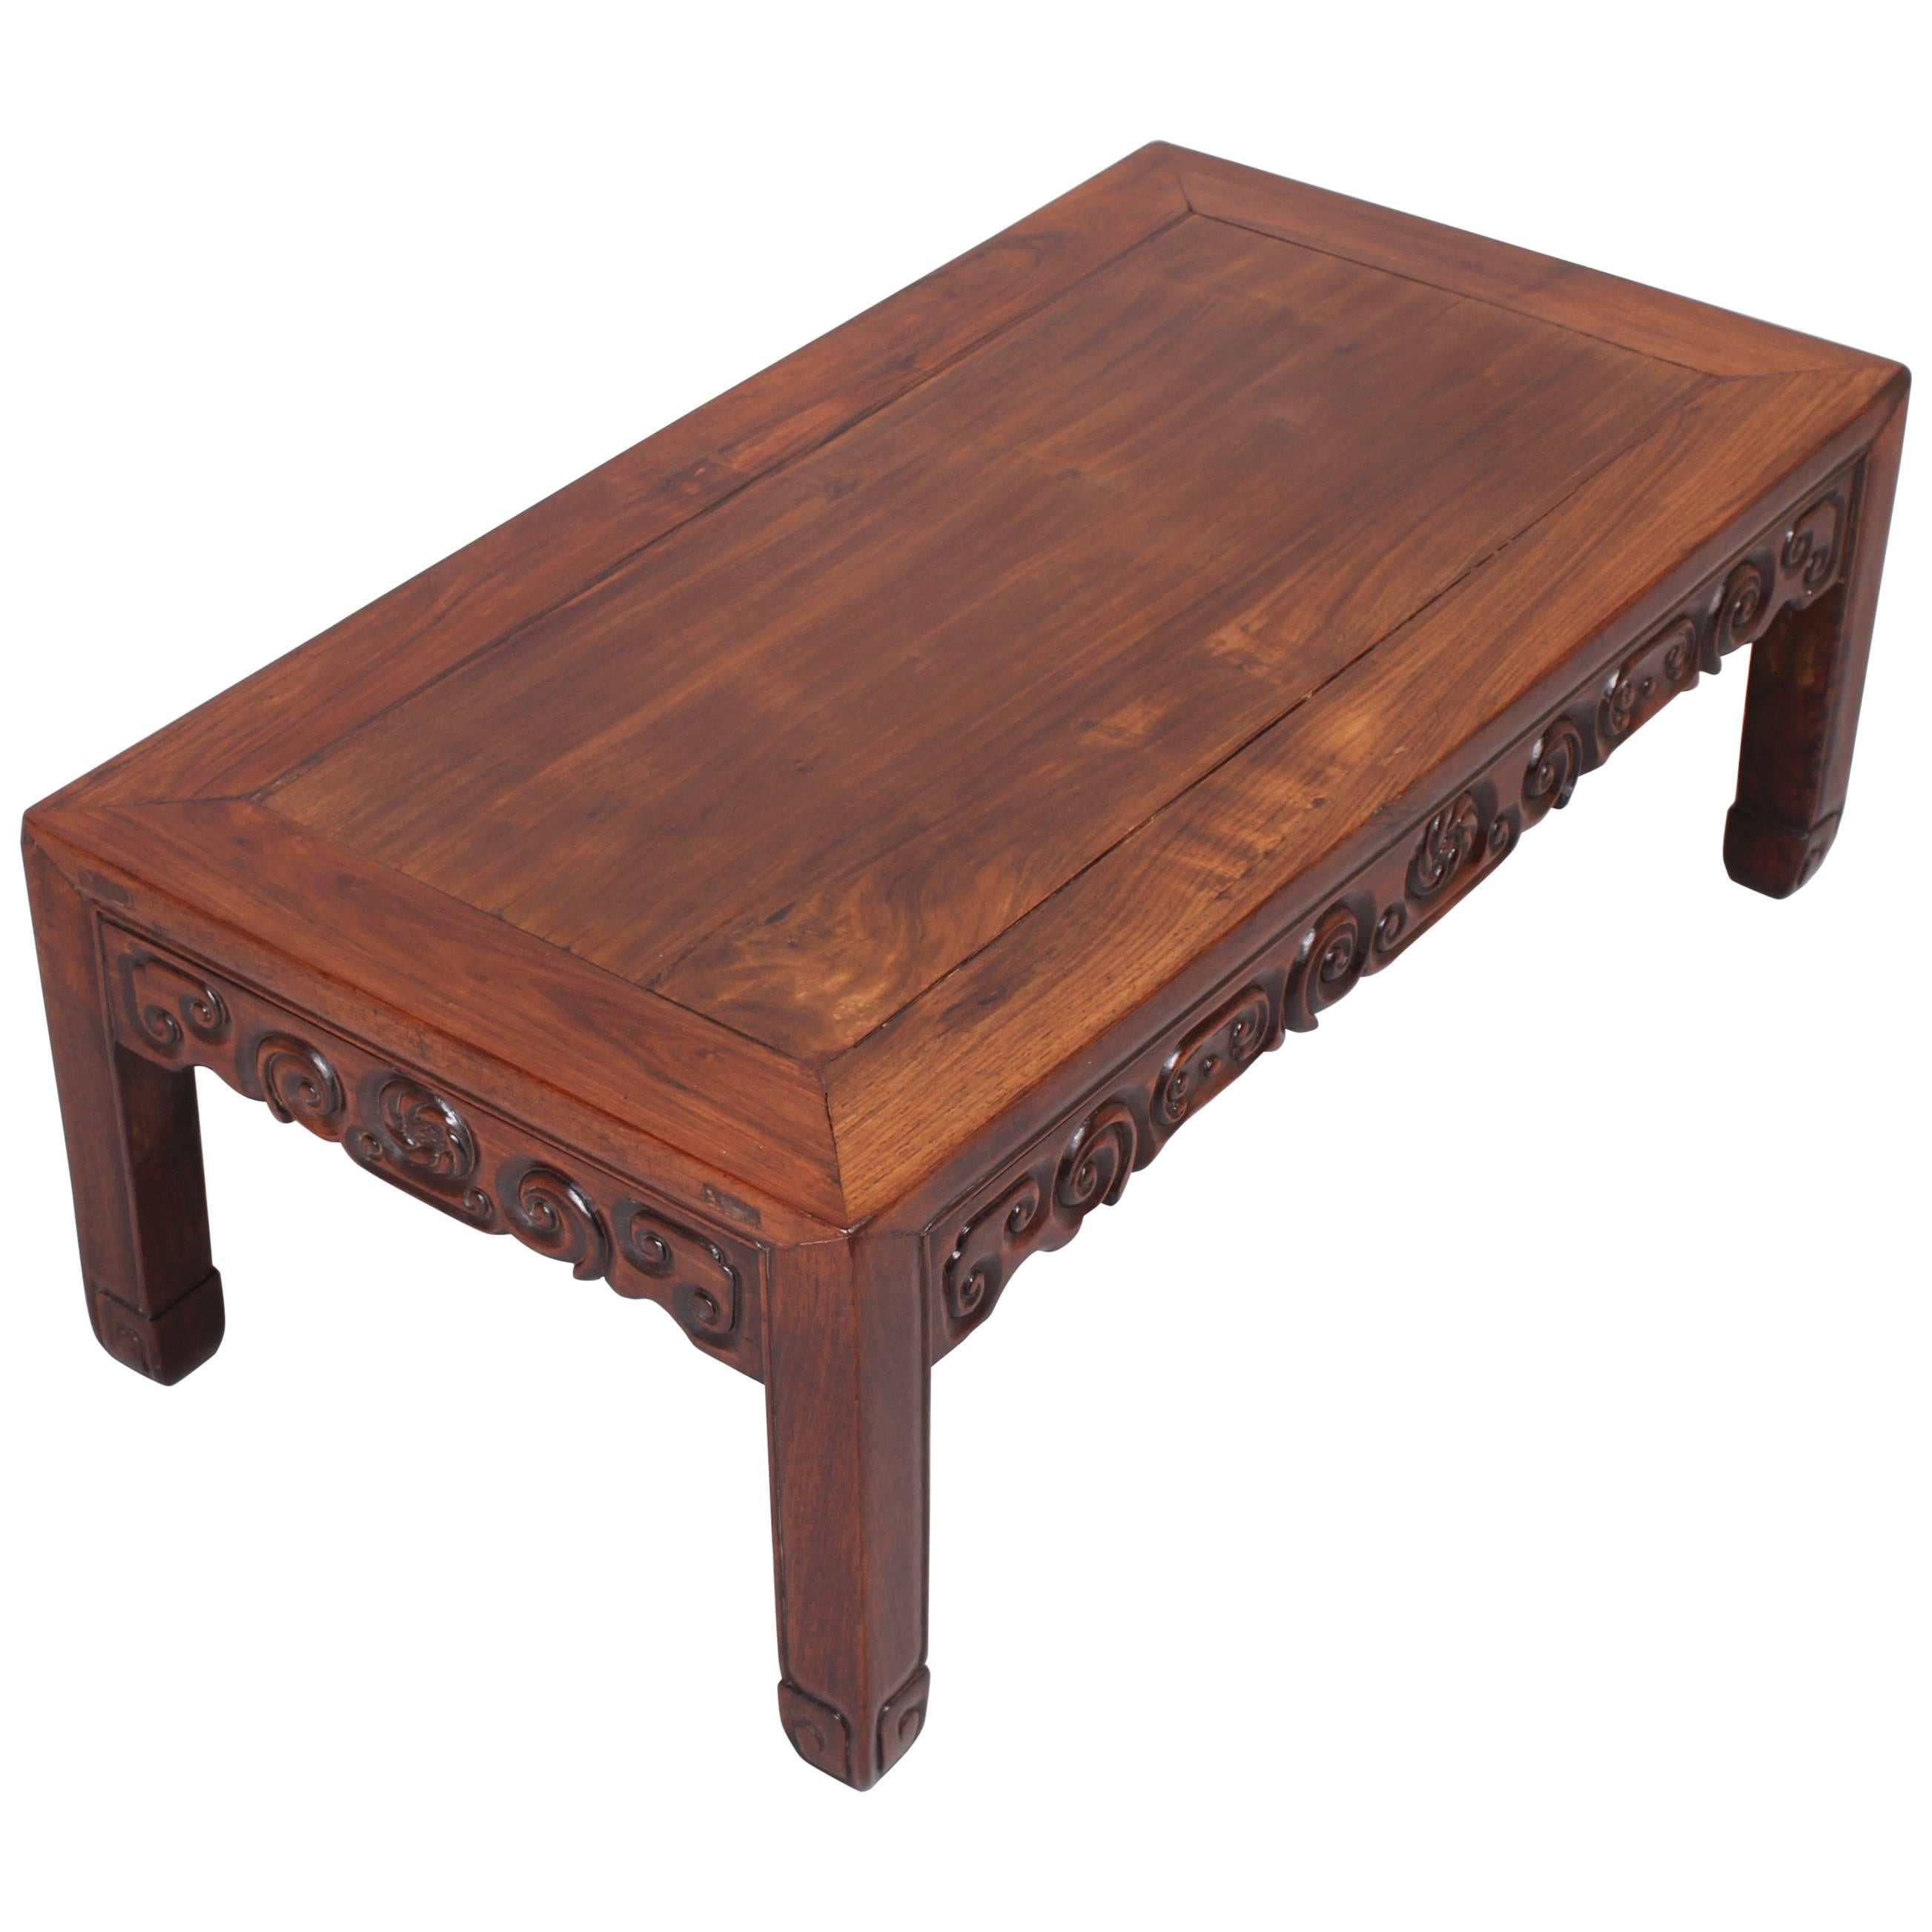 19th Century Chinese Hardwood, Probably Huanghuali, Low Tea-Table